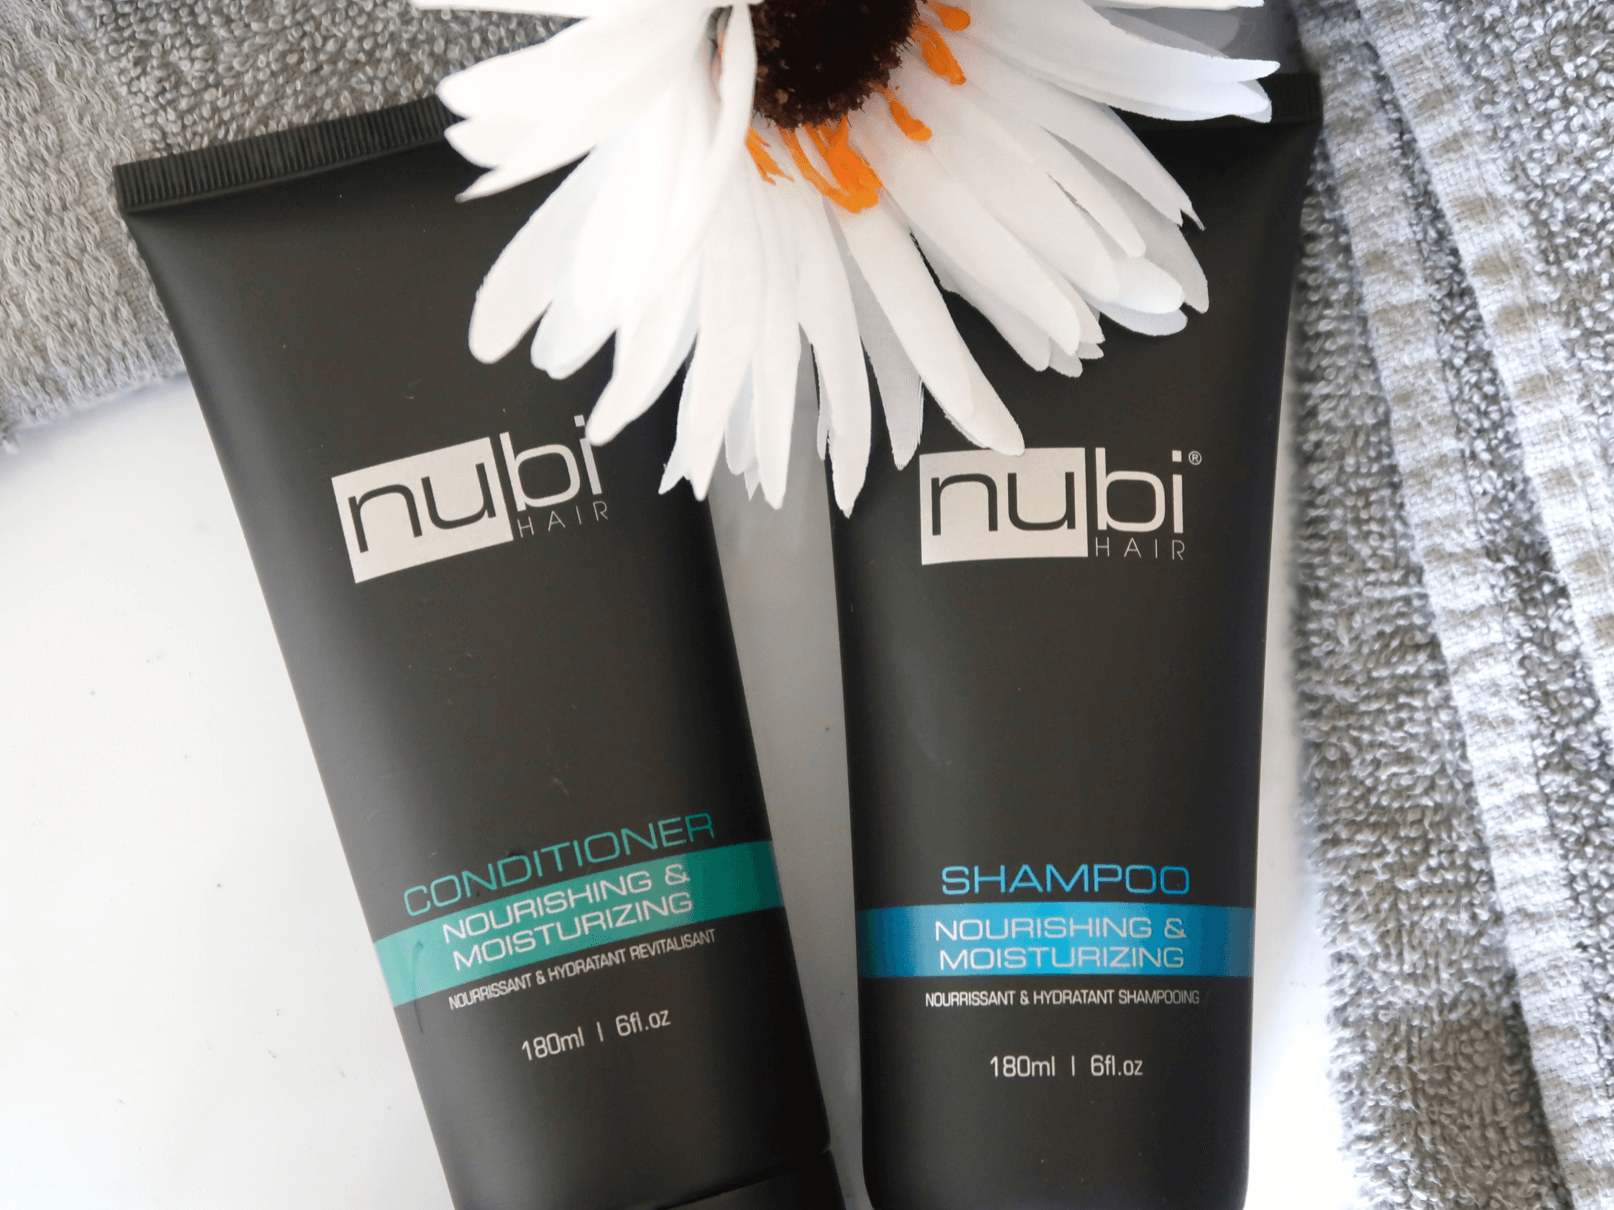 Nubi Hair Shampoo and Conditioner review